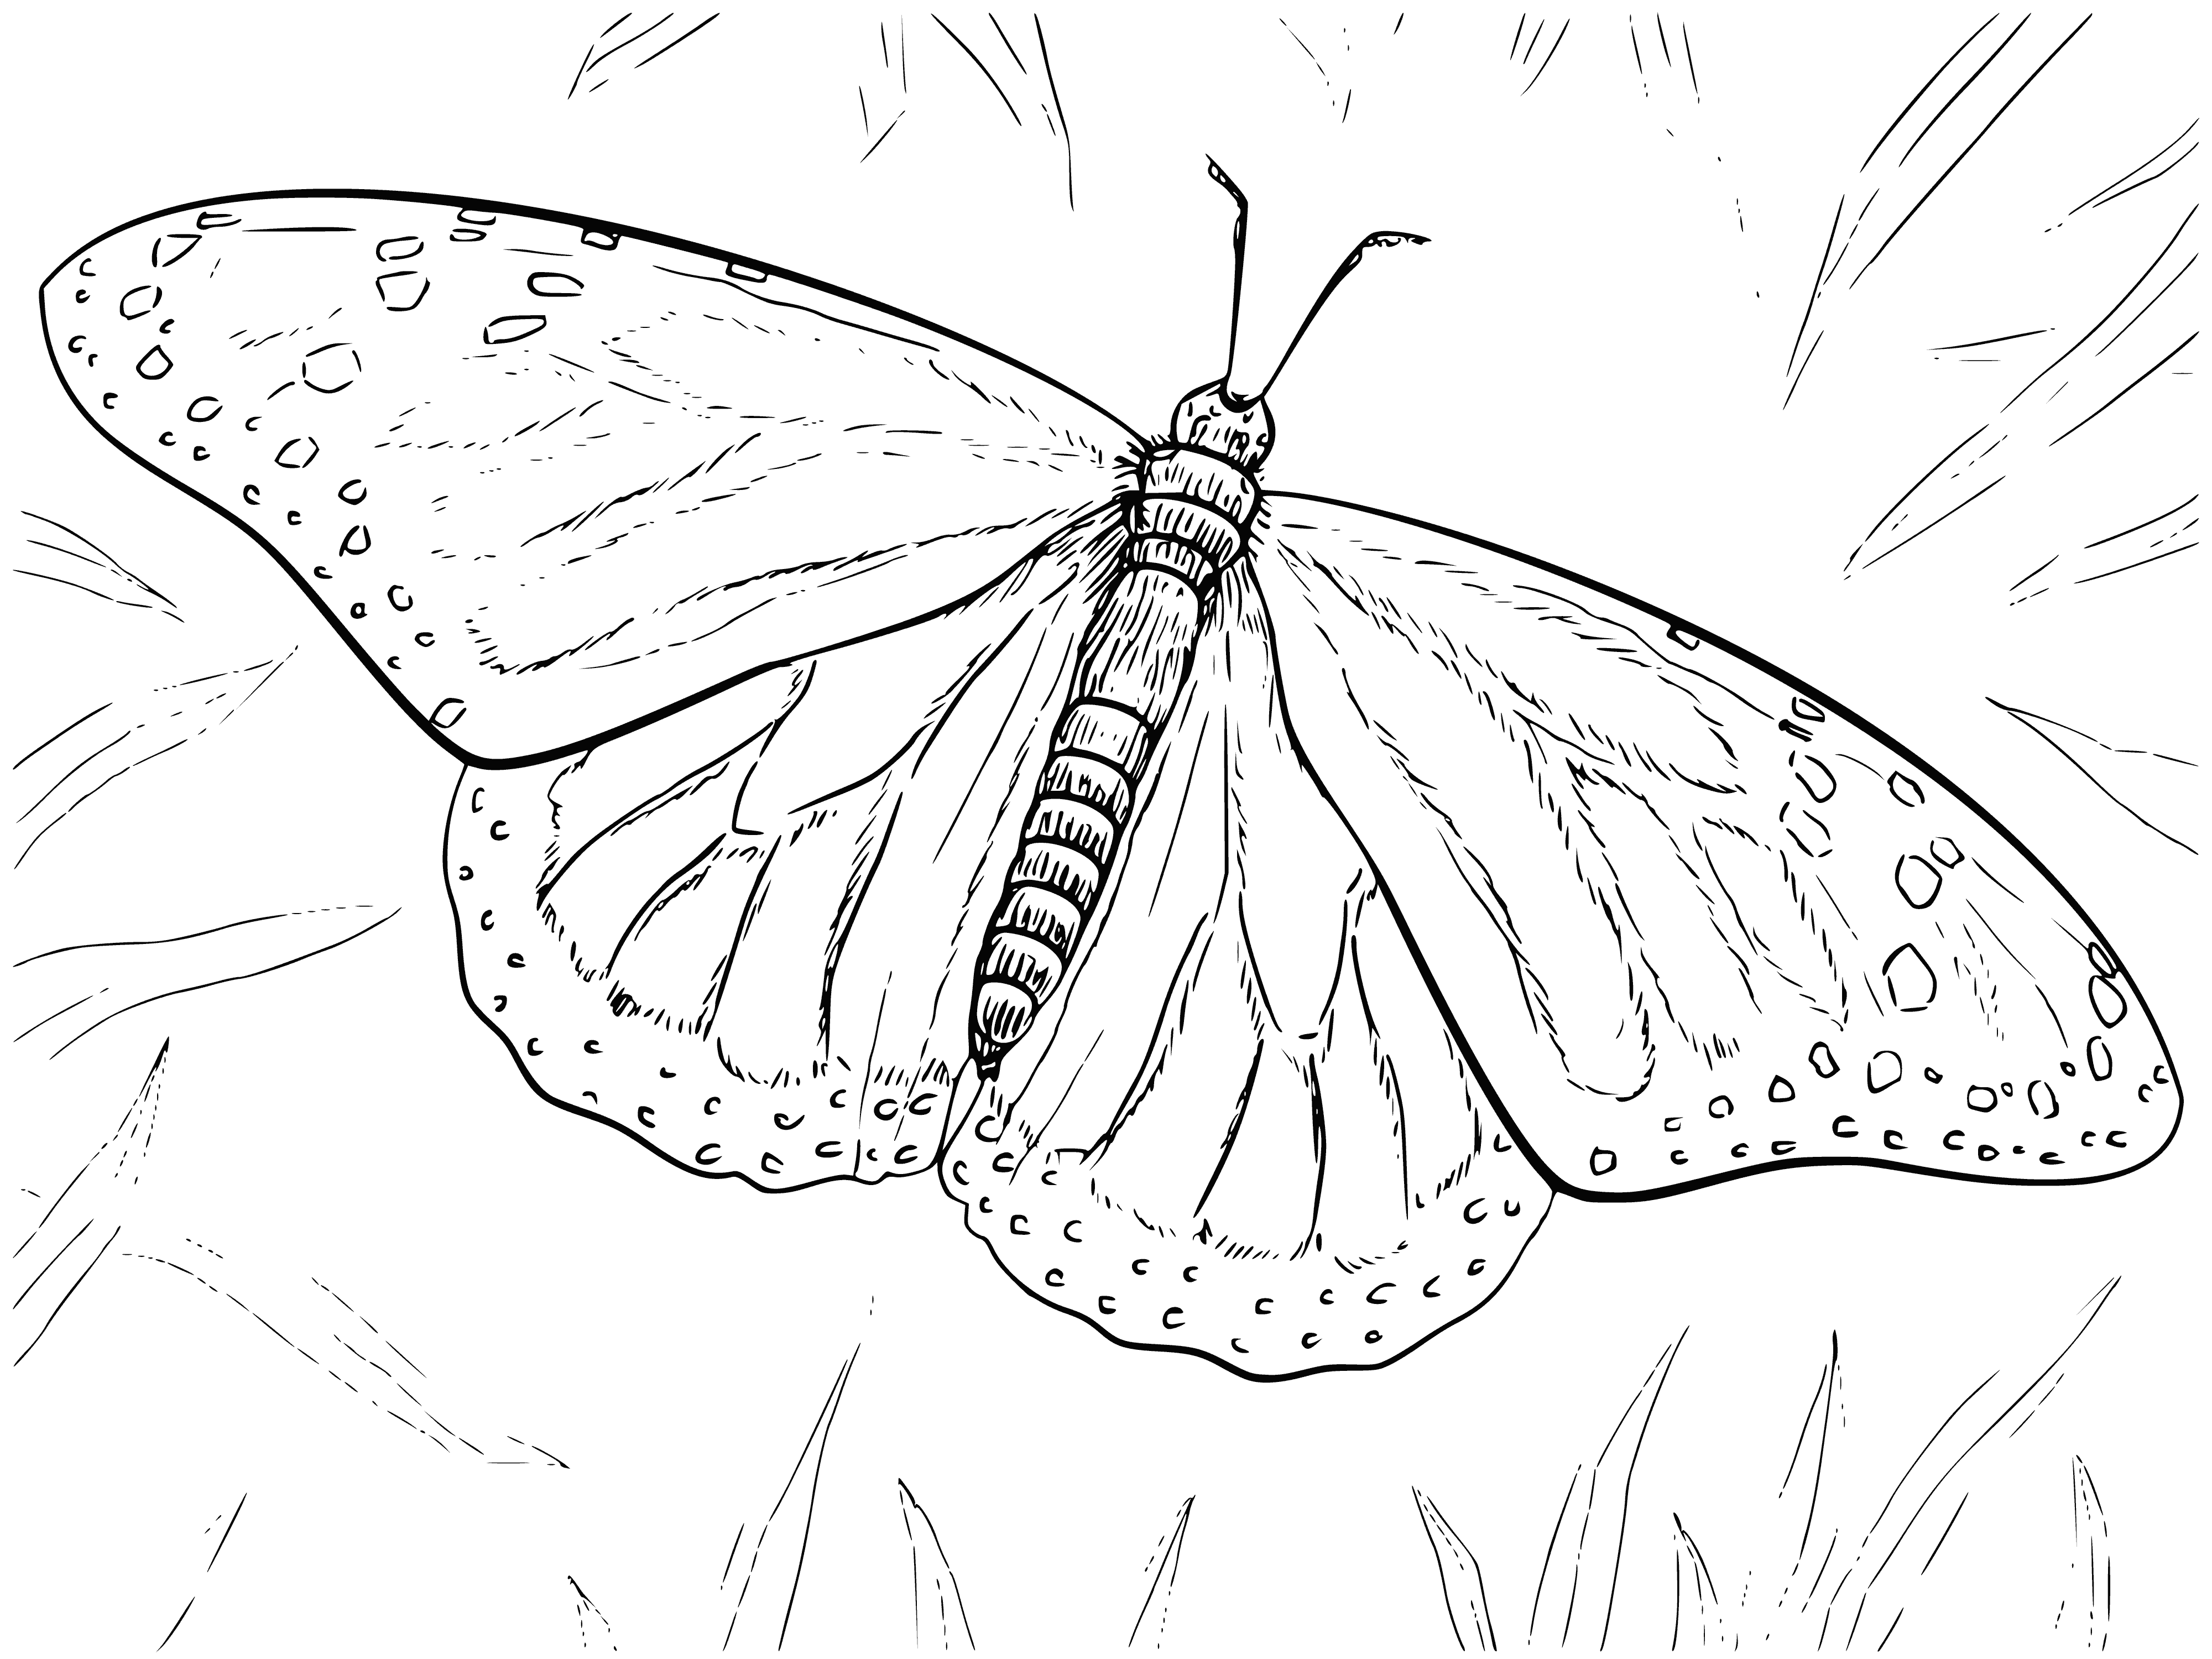 coloring page: Butterfly is flying flapping wings up/down, orange/black spots, two antennae on head. #butterflies